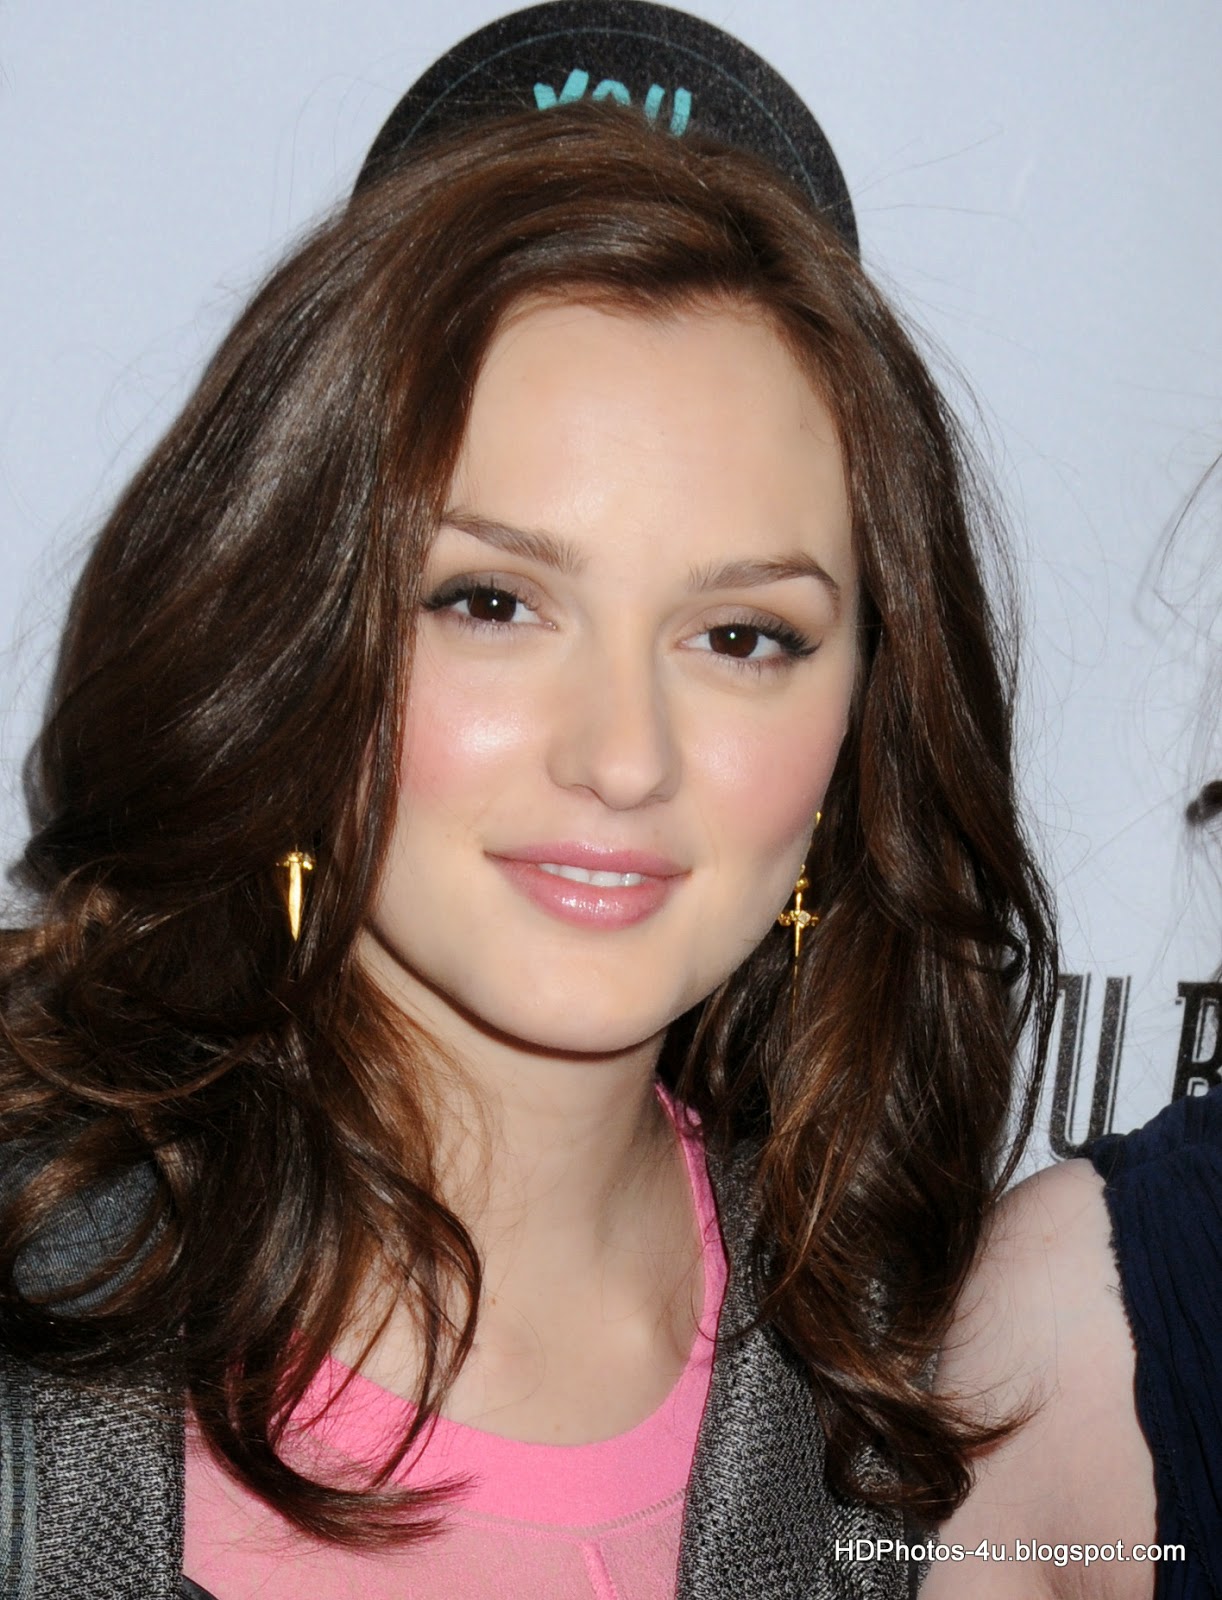 American Actress Leighton Meester Full HD Pictures & Wallpapers.